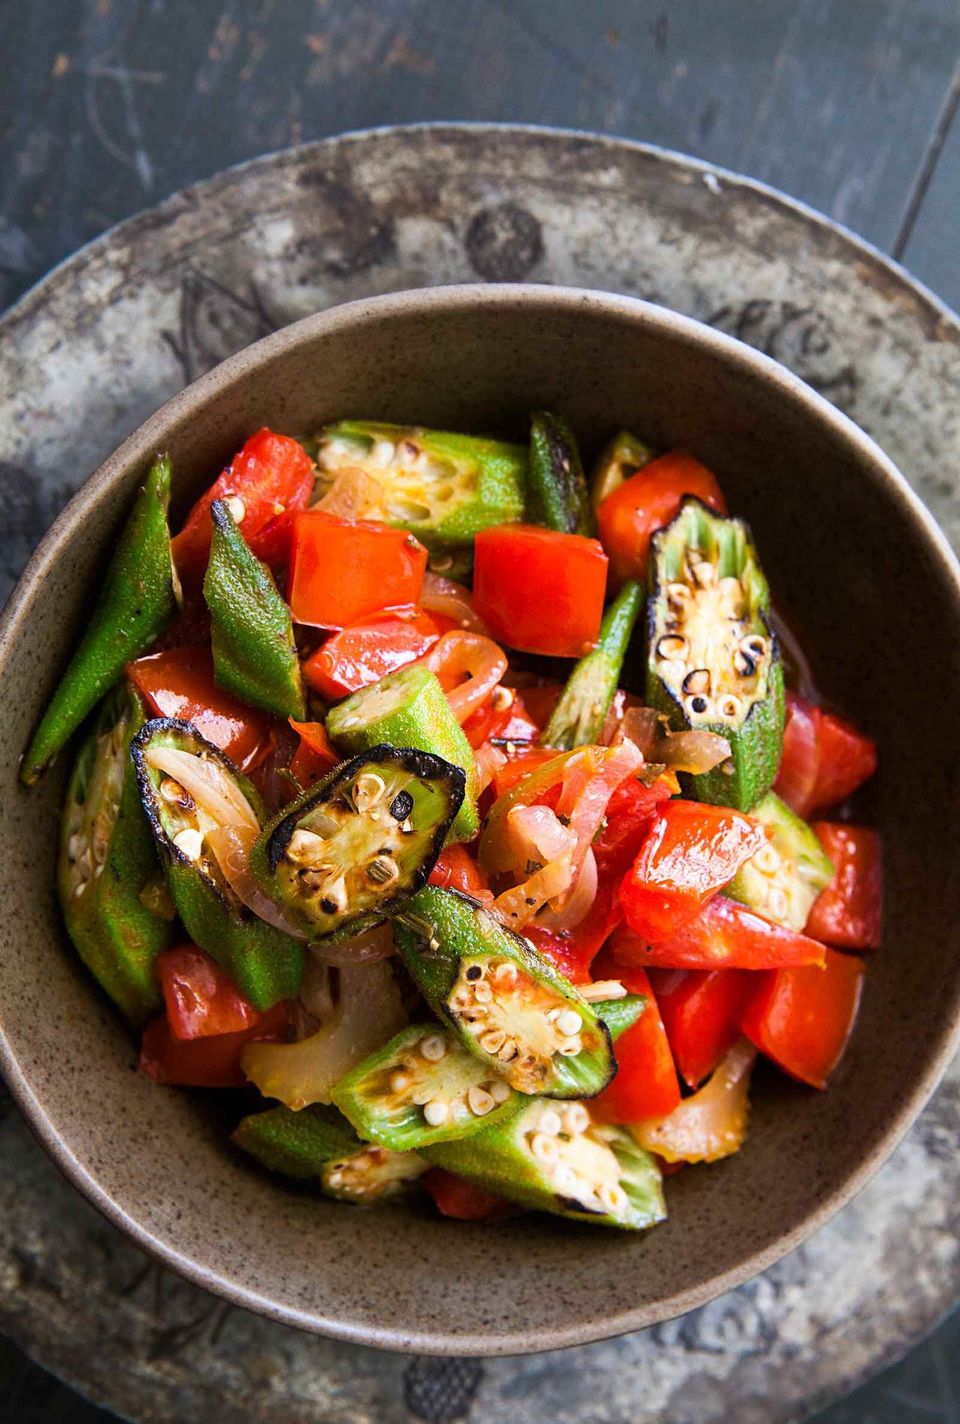 How To Make Okra Less Slimy The Secret Lies In Speed HuffPost Life